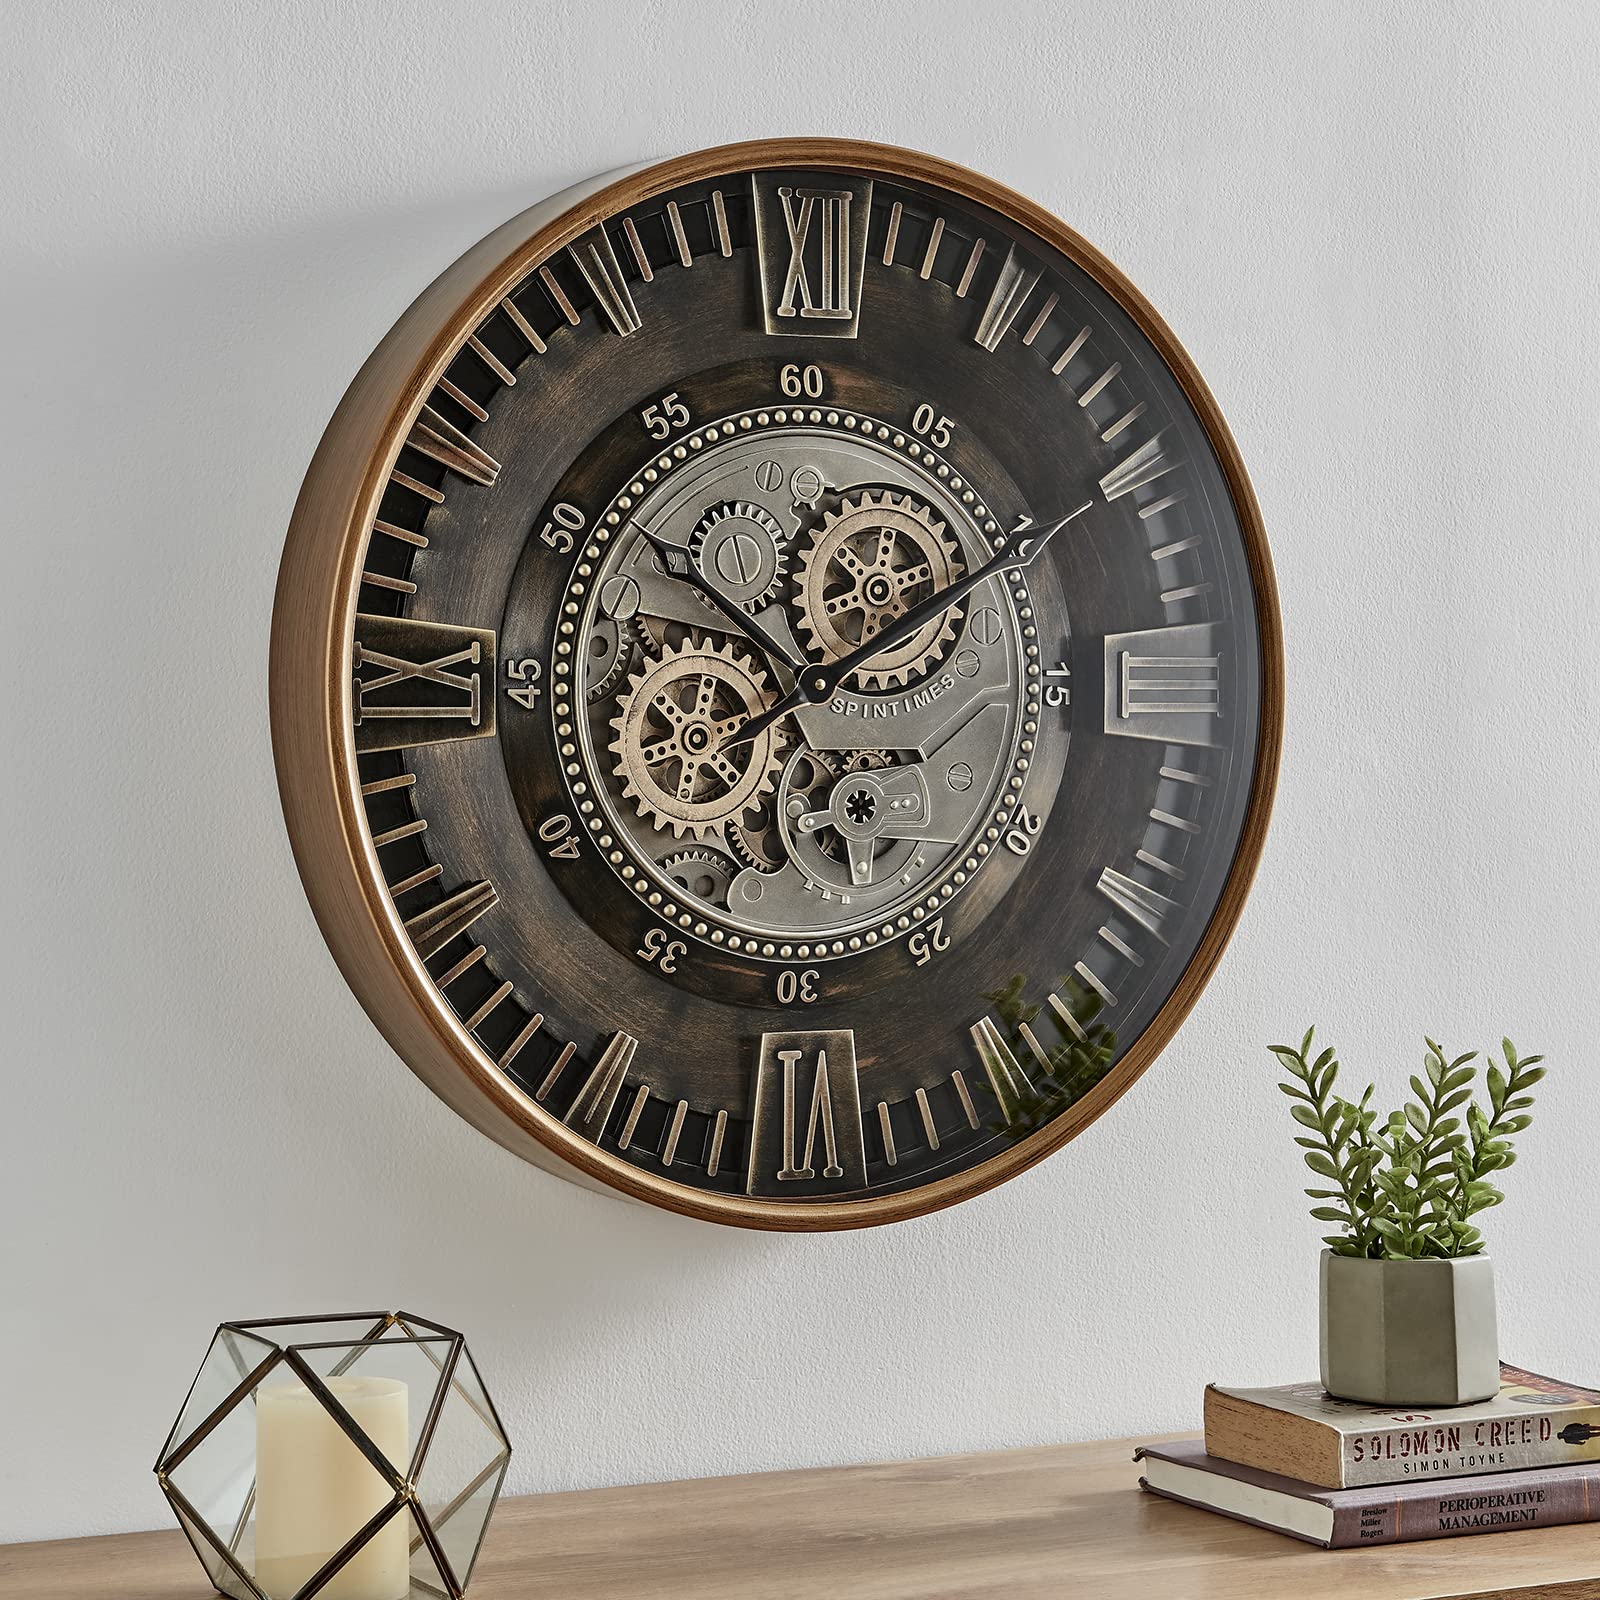 Large 24 Inch Moving Gear Wall Clock for Farmhouse Living Room Decor